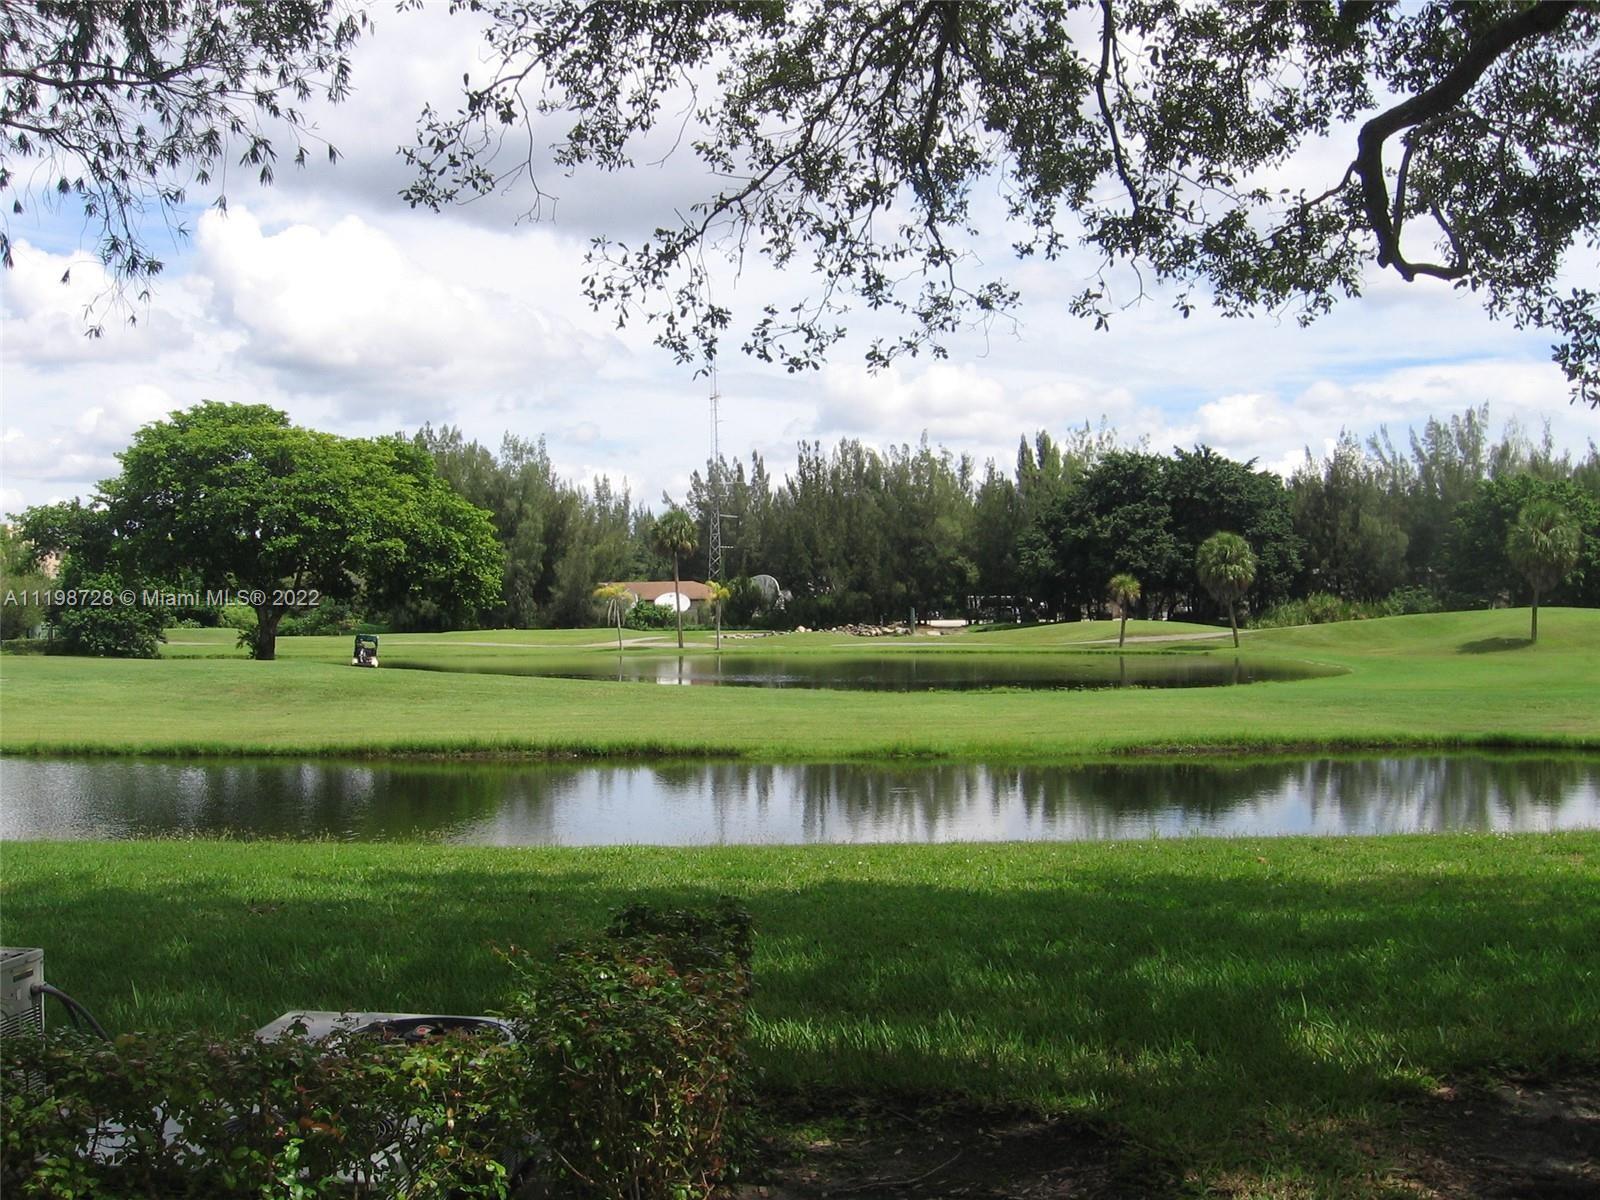 a view of a golf course of a lake